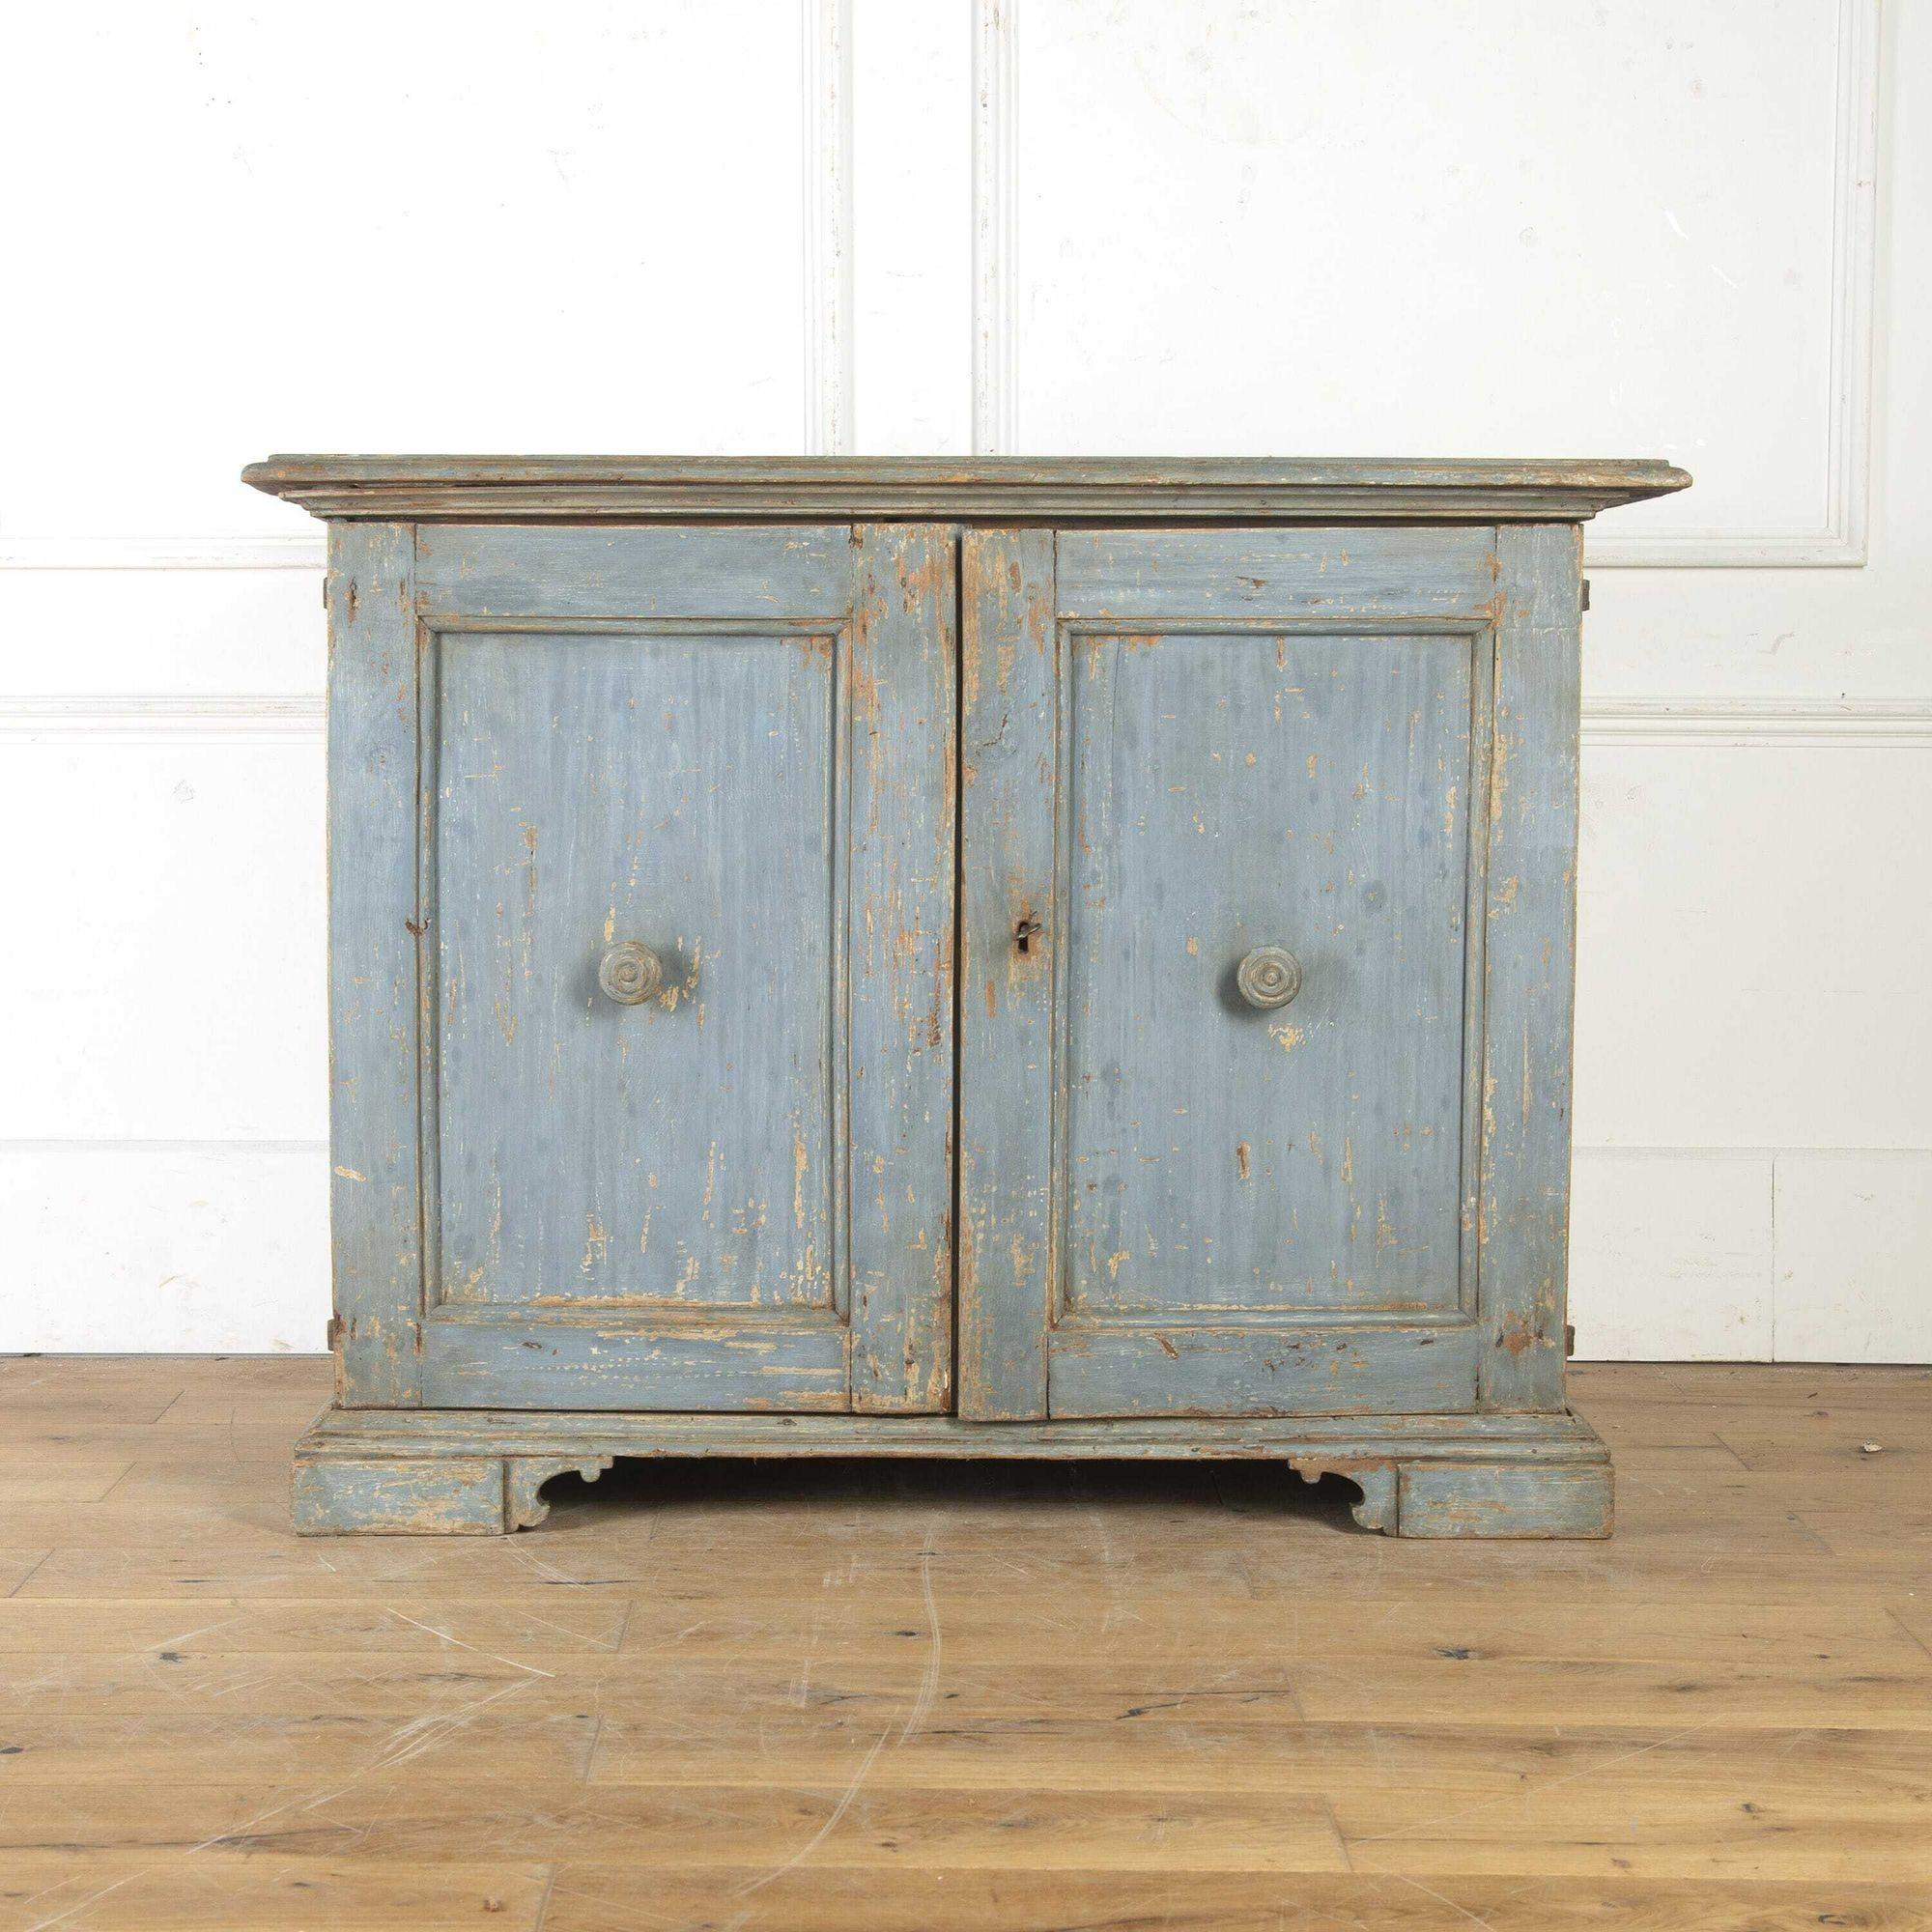 Charming Italian 18th Century cupboard.
This cupboard has attractive low proportions, making it ideal for storage as well as display. 
The overhanging moulded top sits over two panelled doors with turned wooden handles.
The interior is a delightful